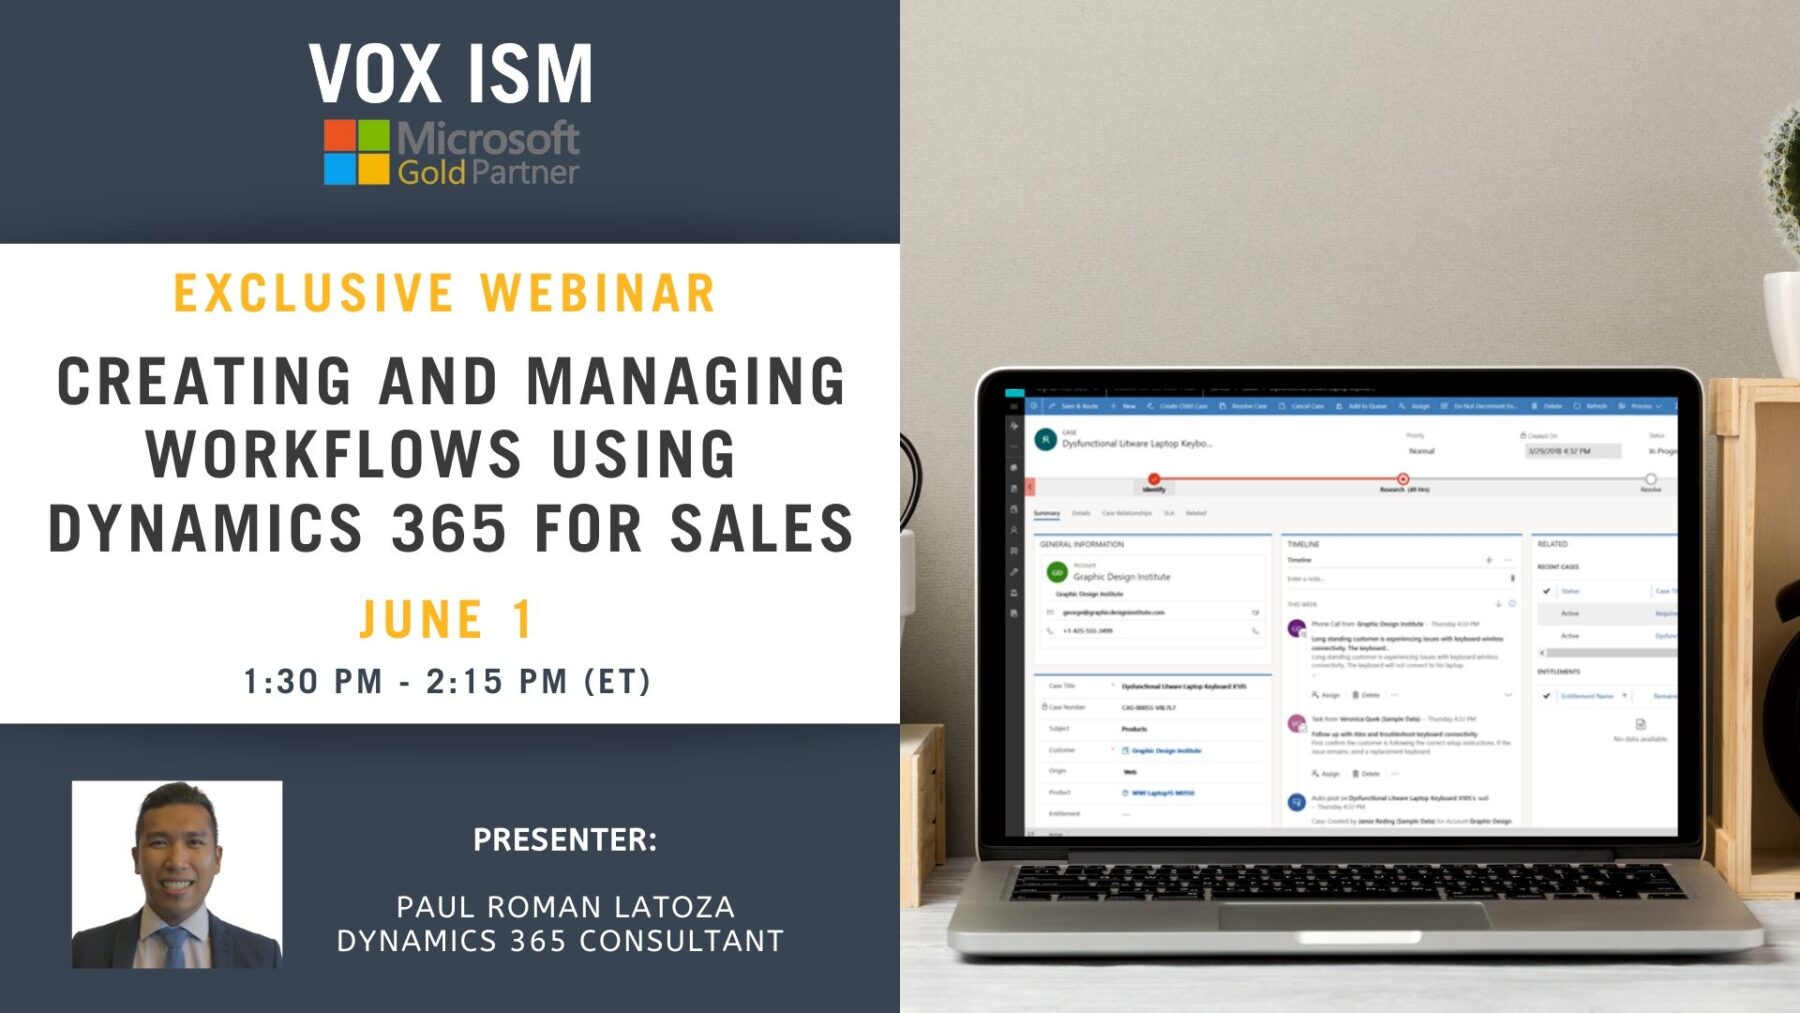 Creating and Managing Workflows using Dynamics 365 for Sales - June 1 - Webinar VOX ISM